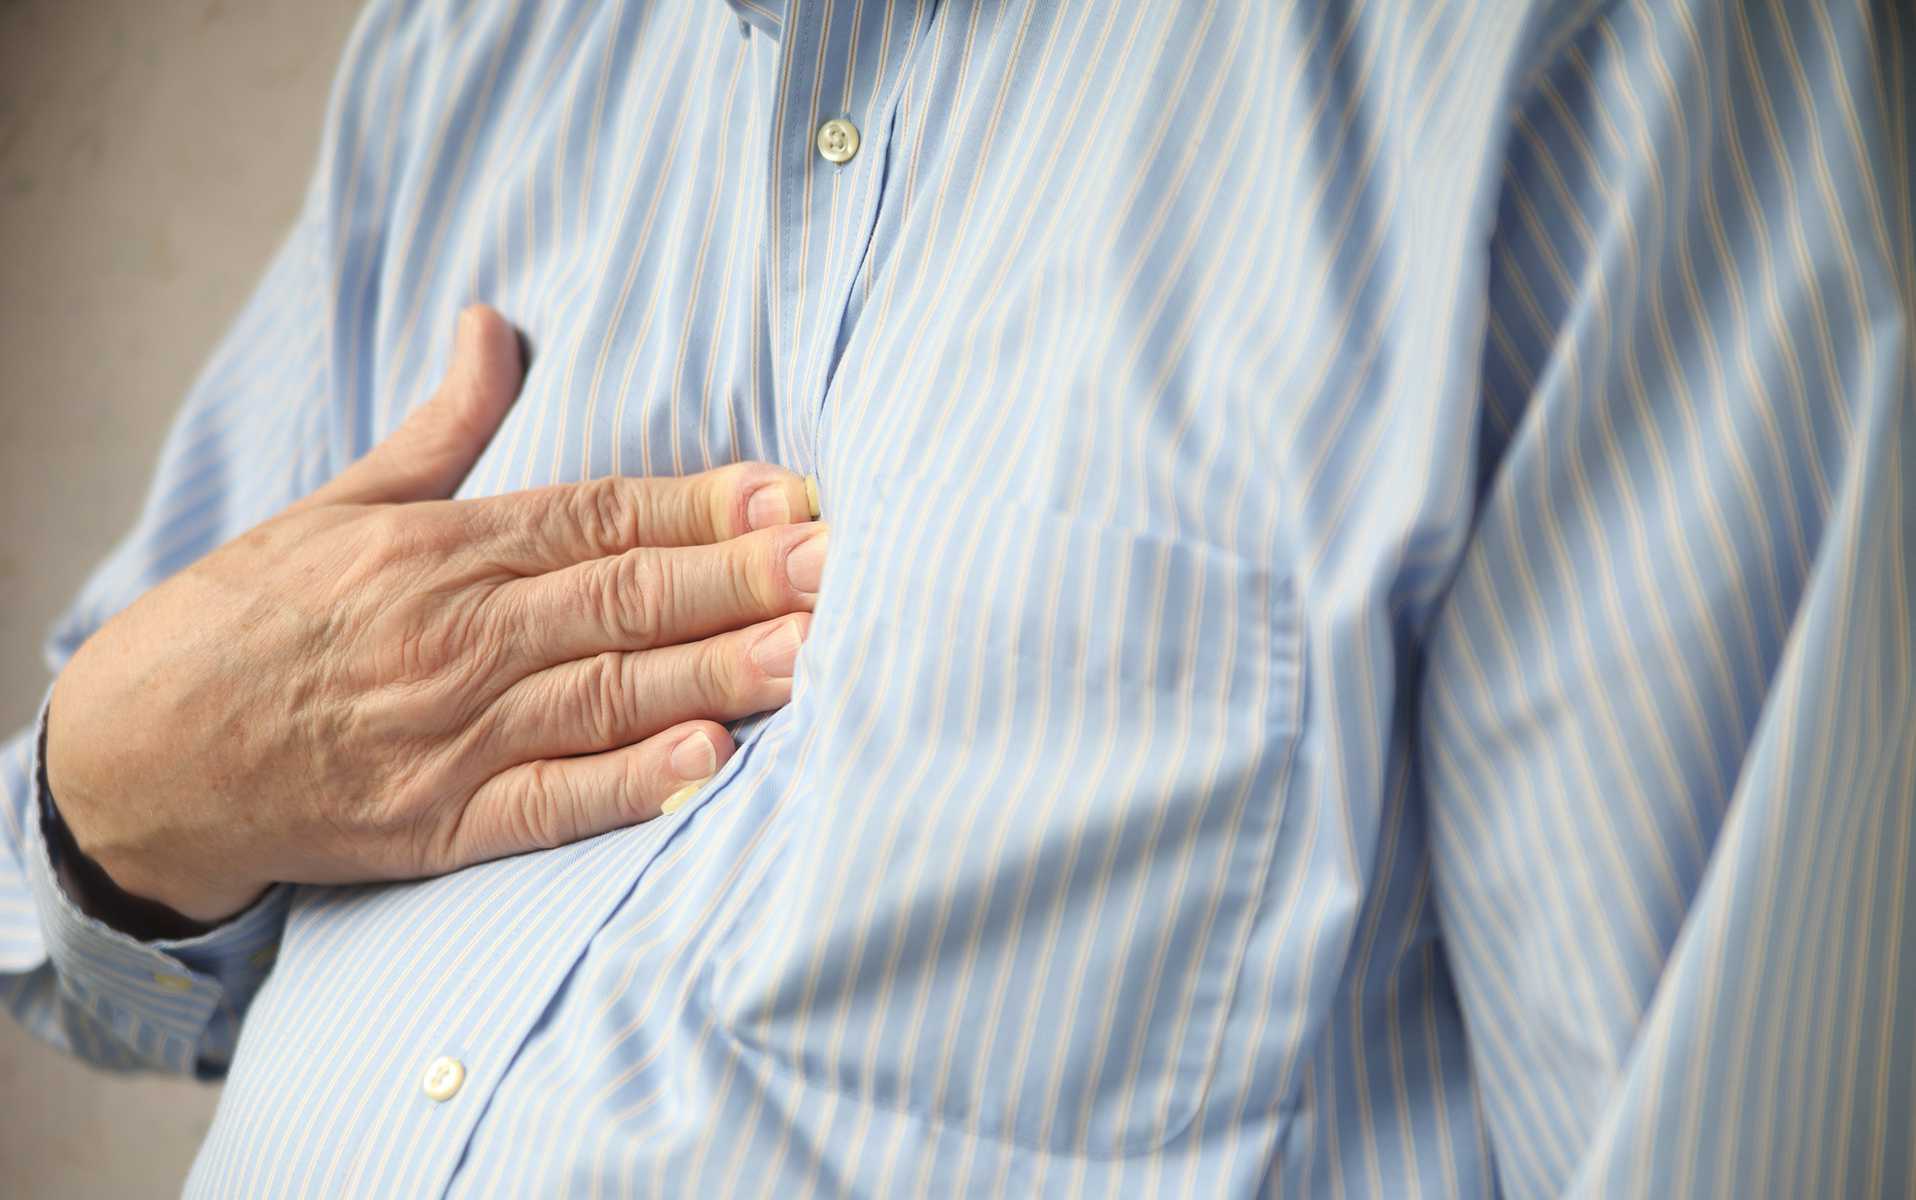 Cough related to acid reflux